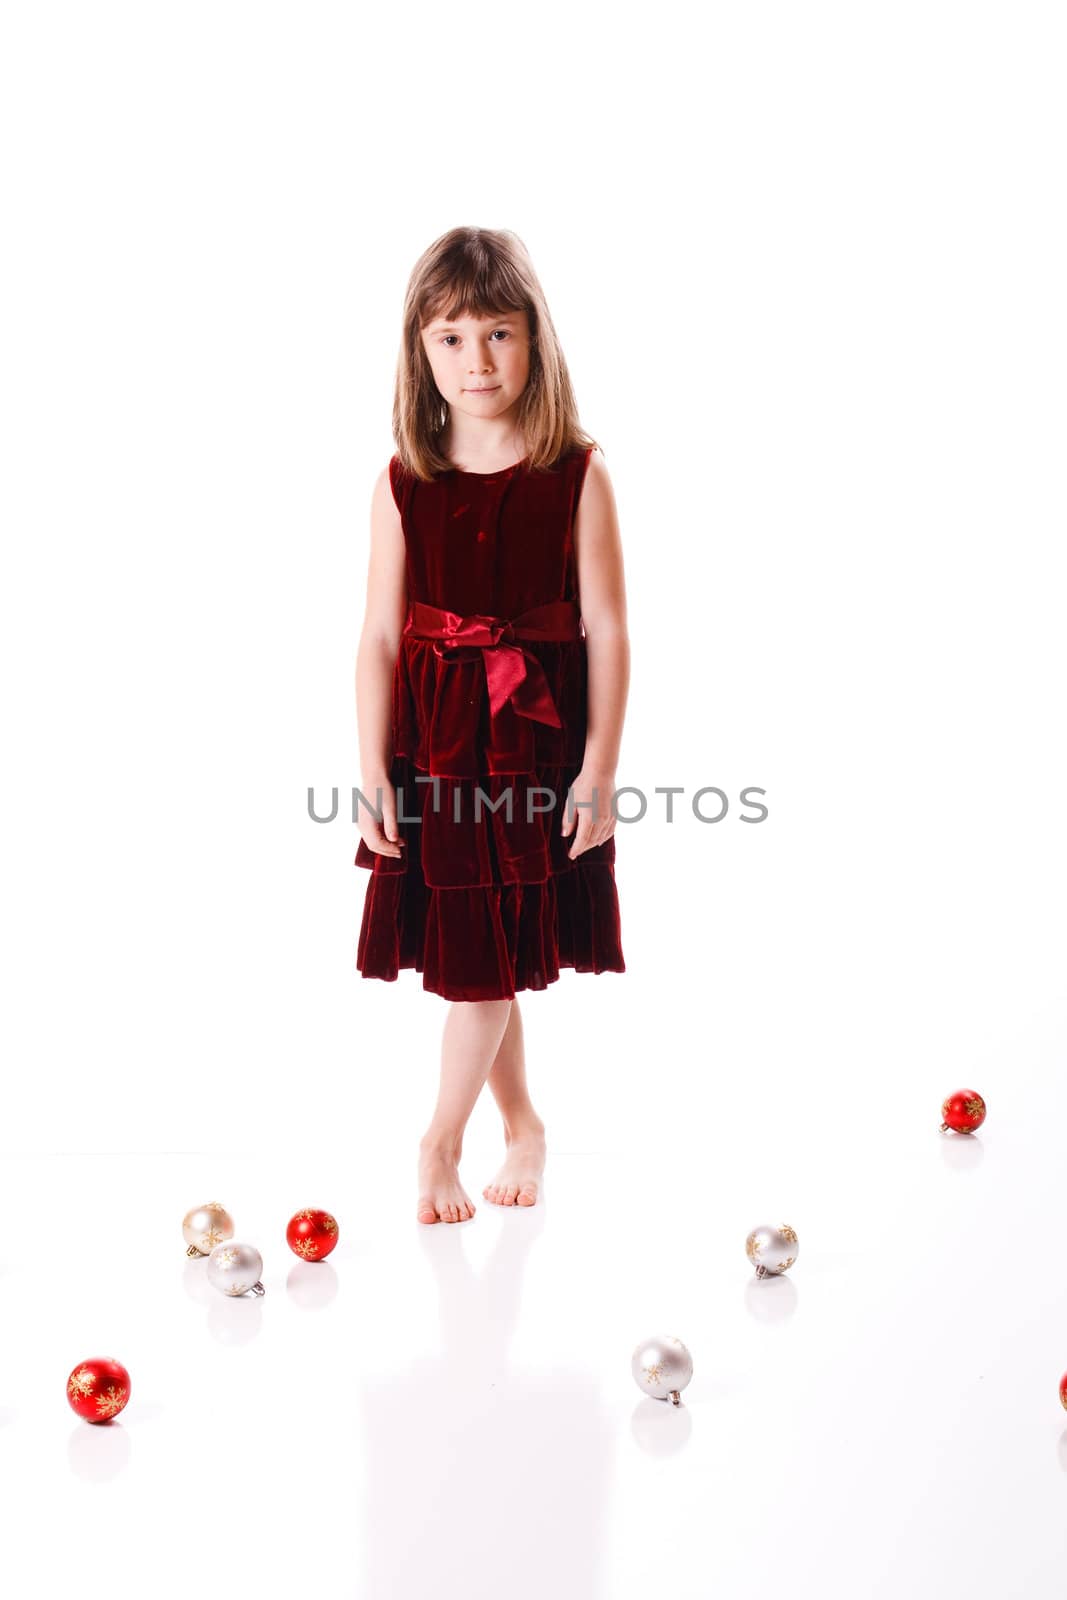 Little christmas girl by Talanis